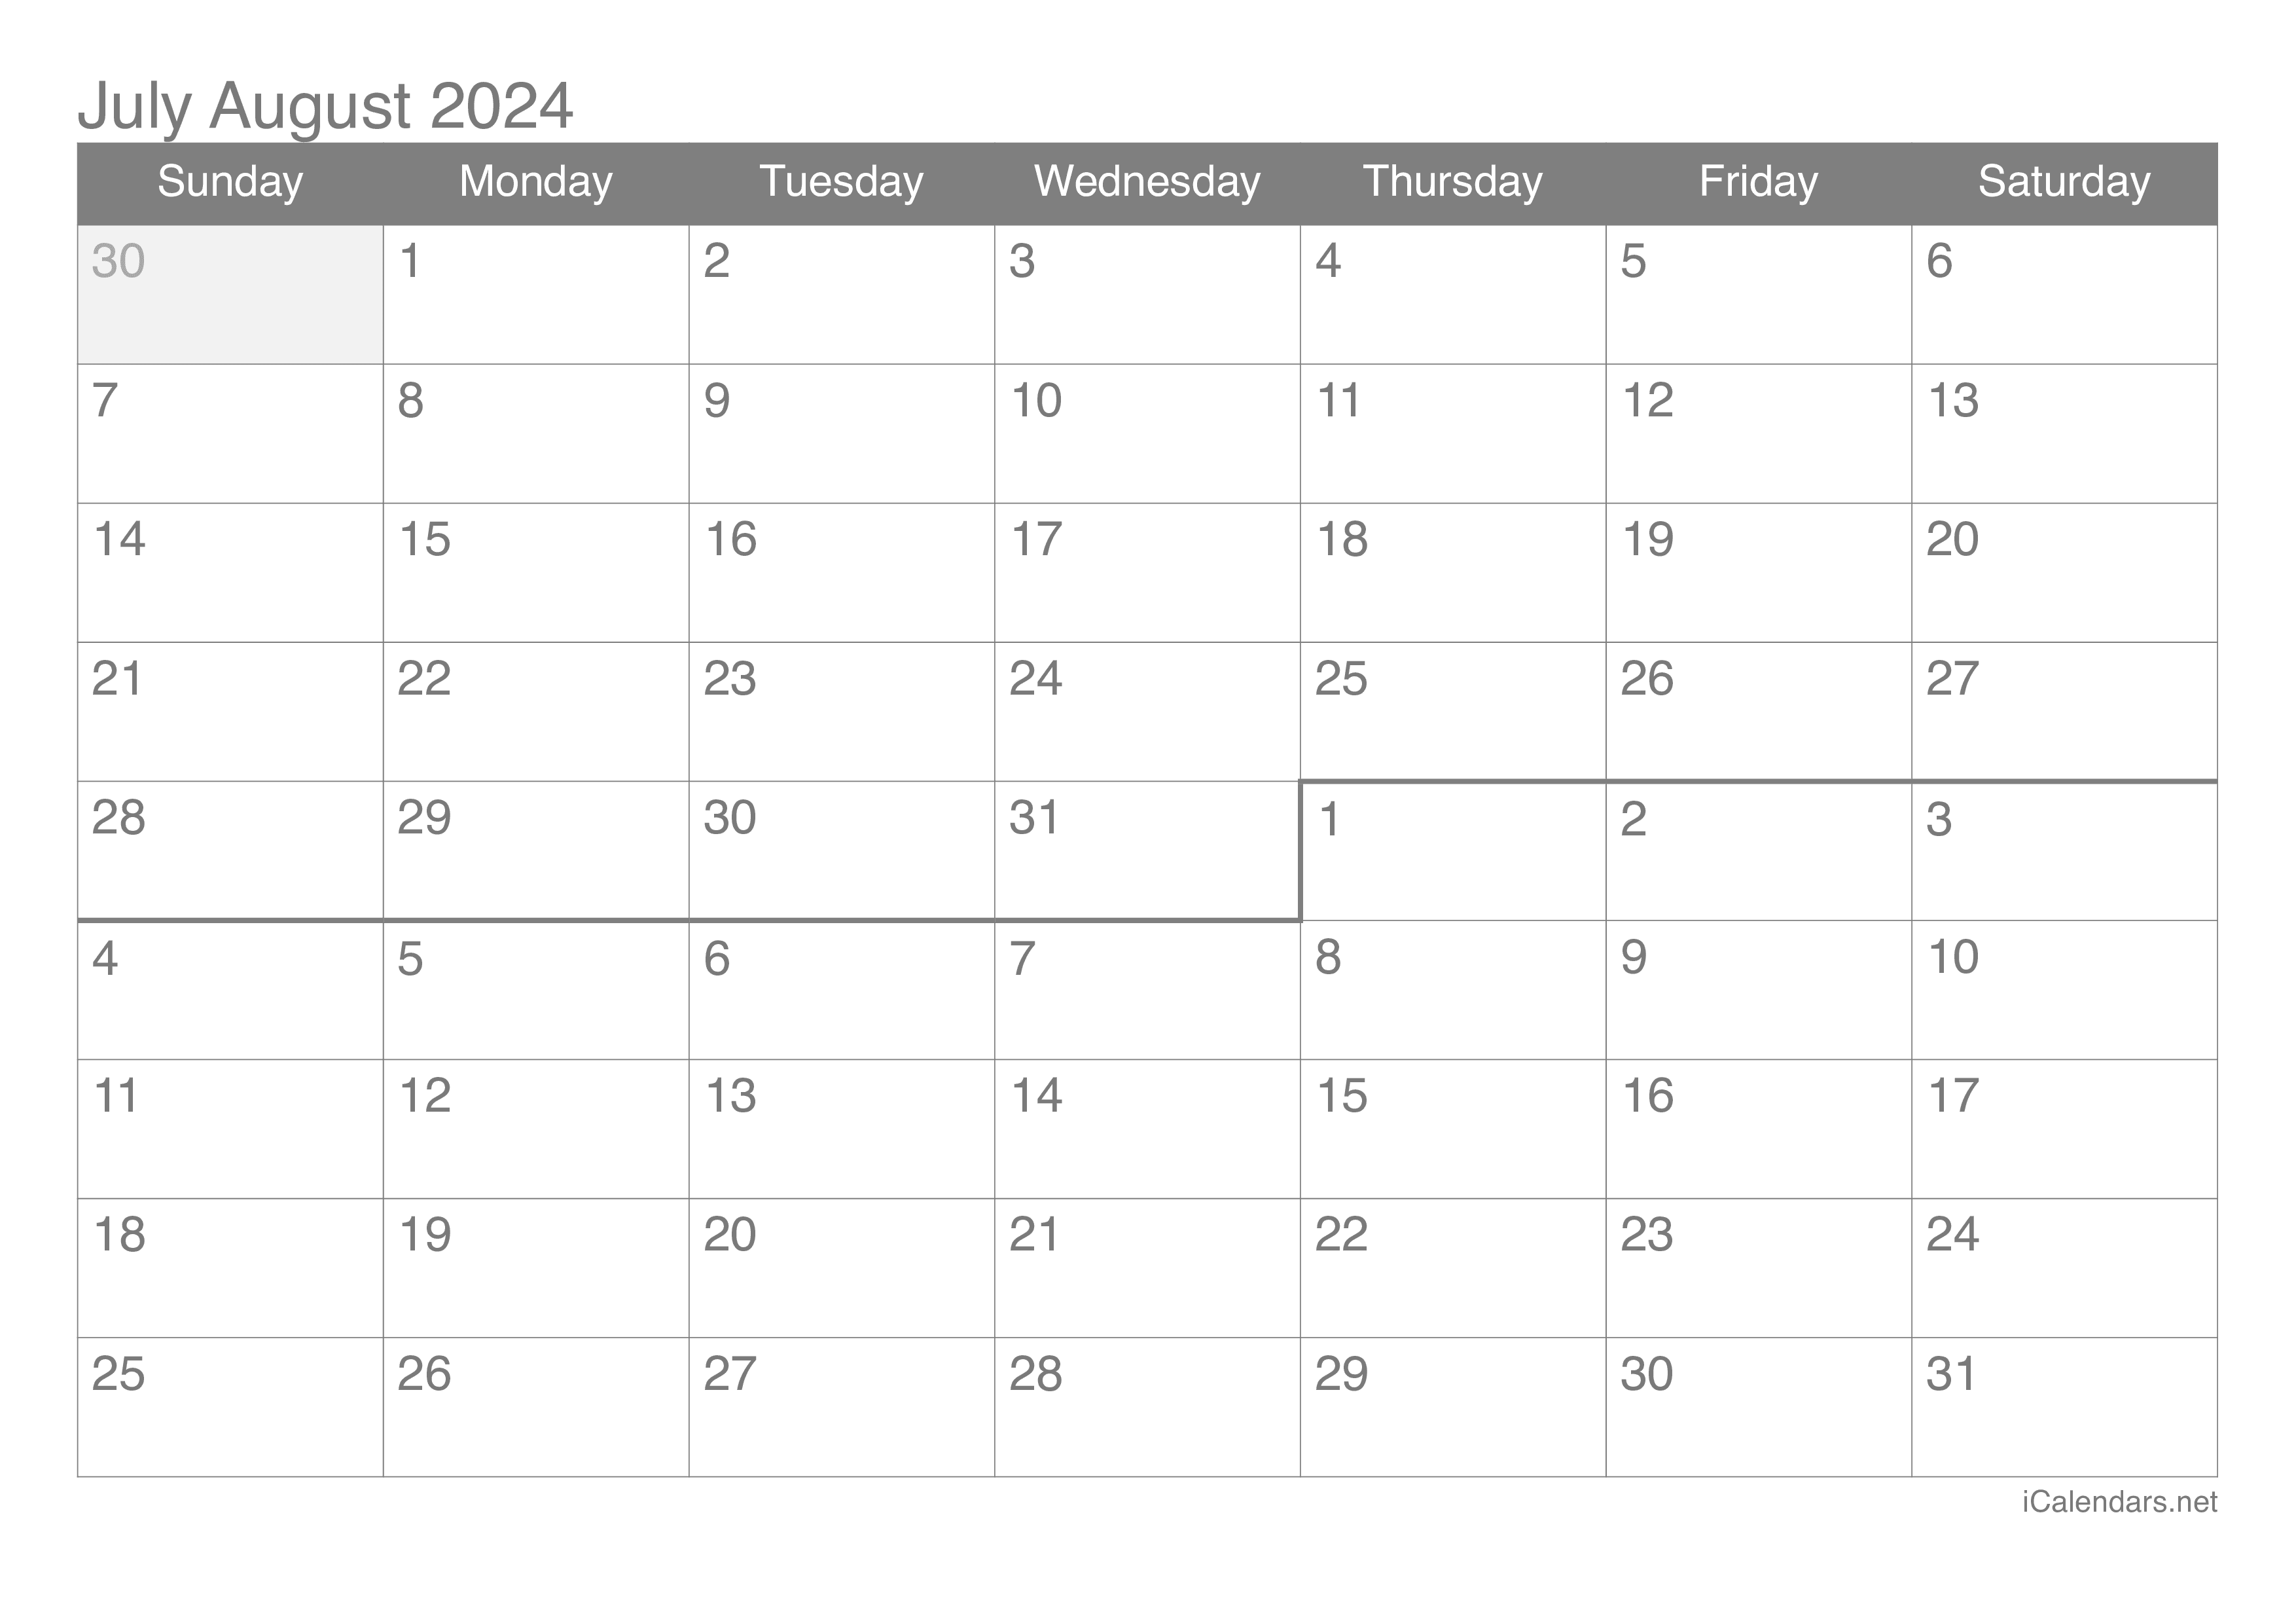 July And August 2024 Printable Calendar intended for Calendar For July And August 2024